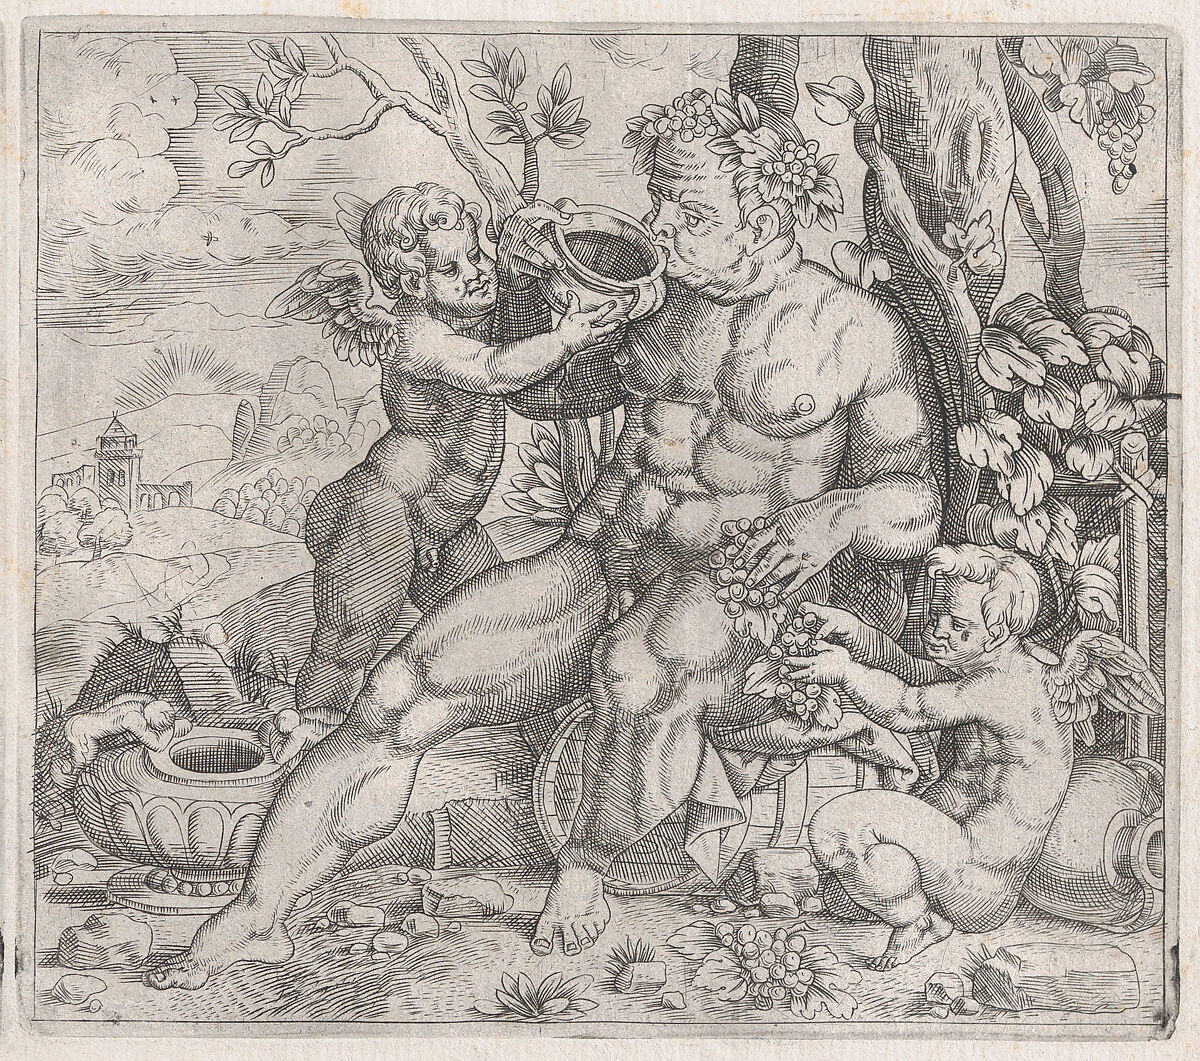 Bacchus, Seated, Drinking from a Vase Presented by a Putto, from "Speculum Romanae Magnificentiae", Anonymous, Etching 